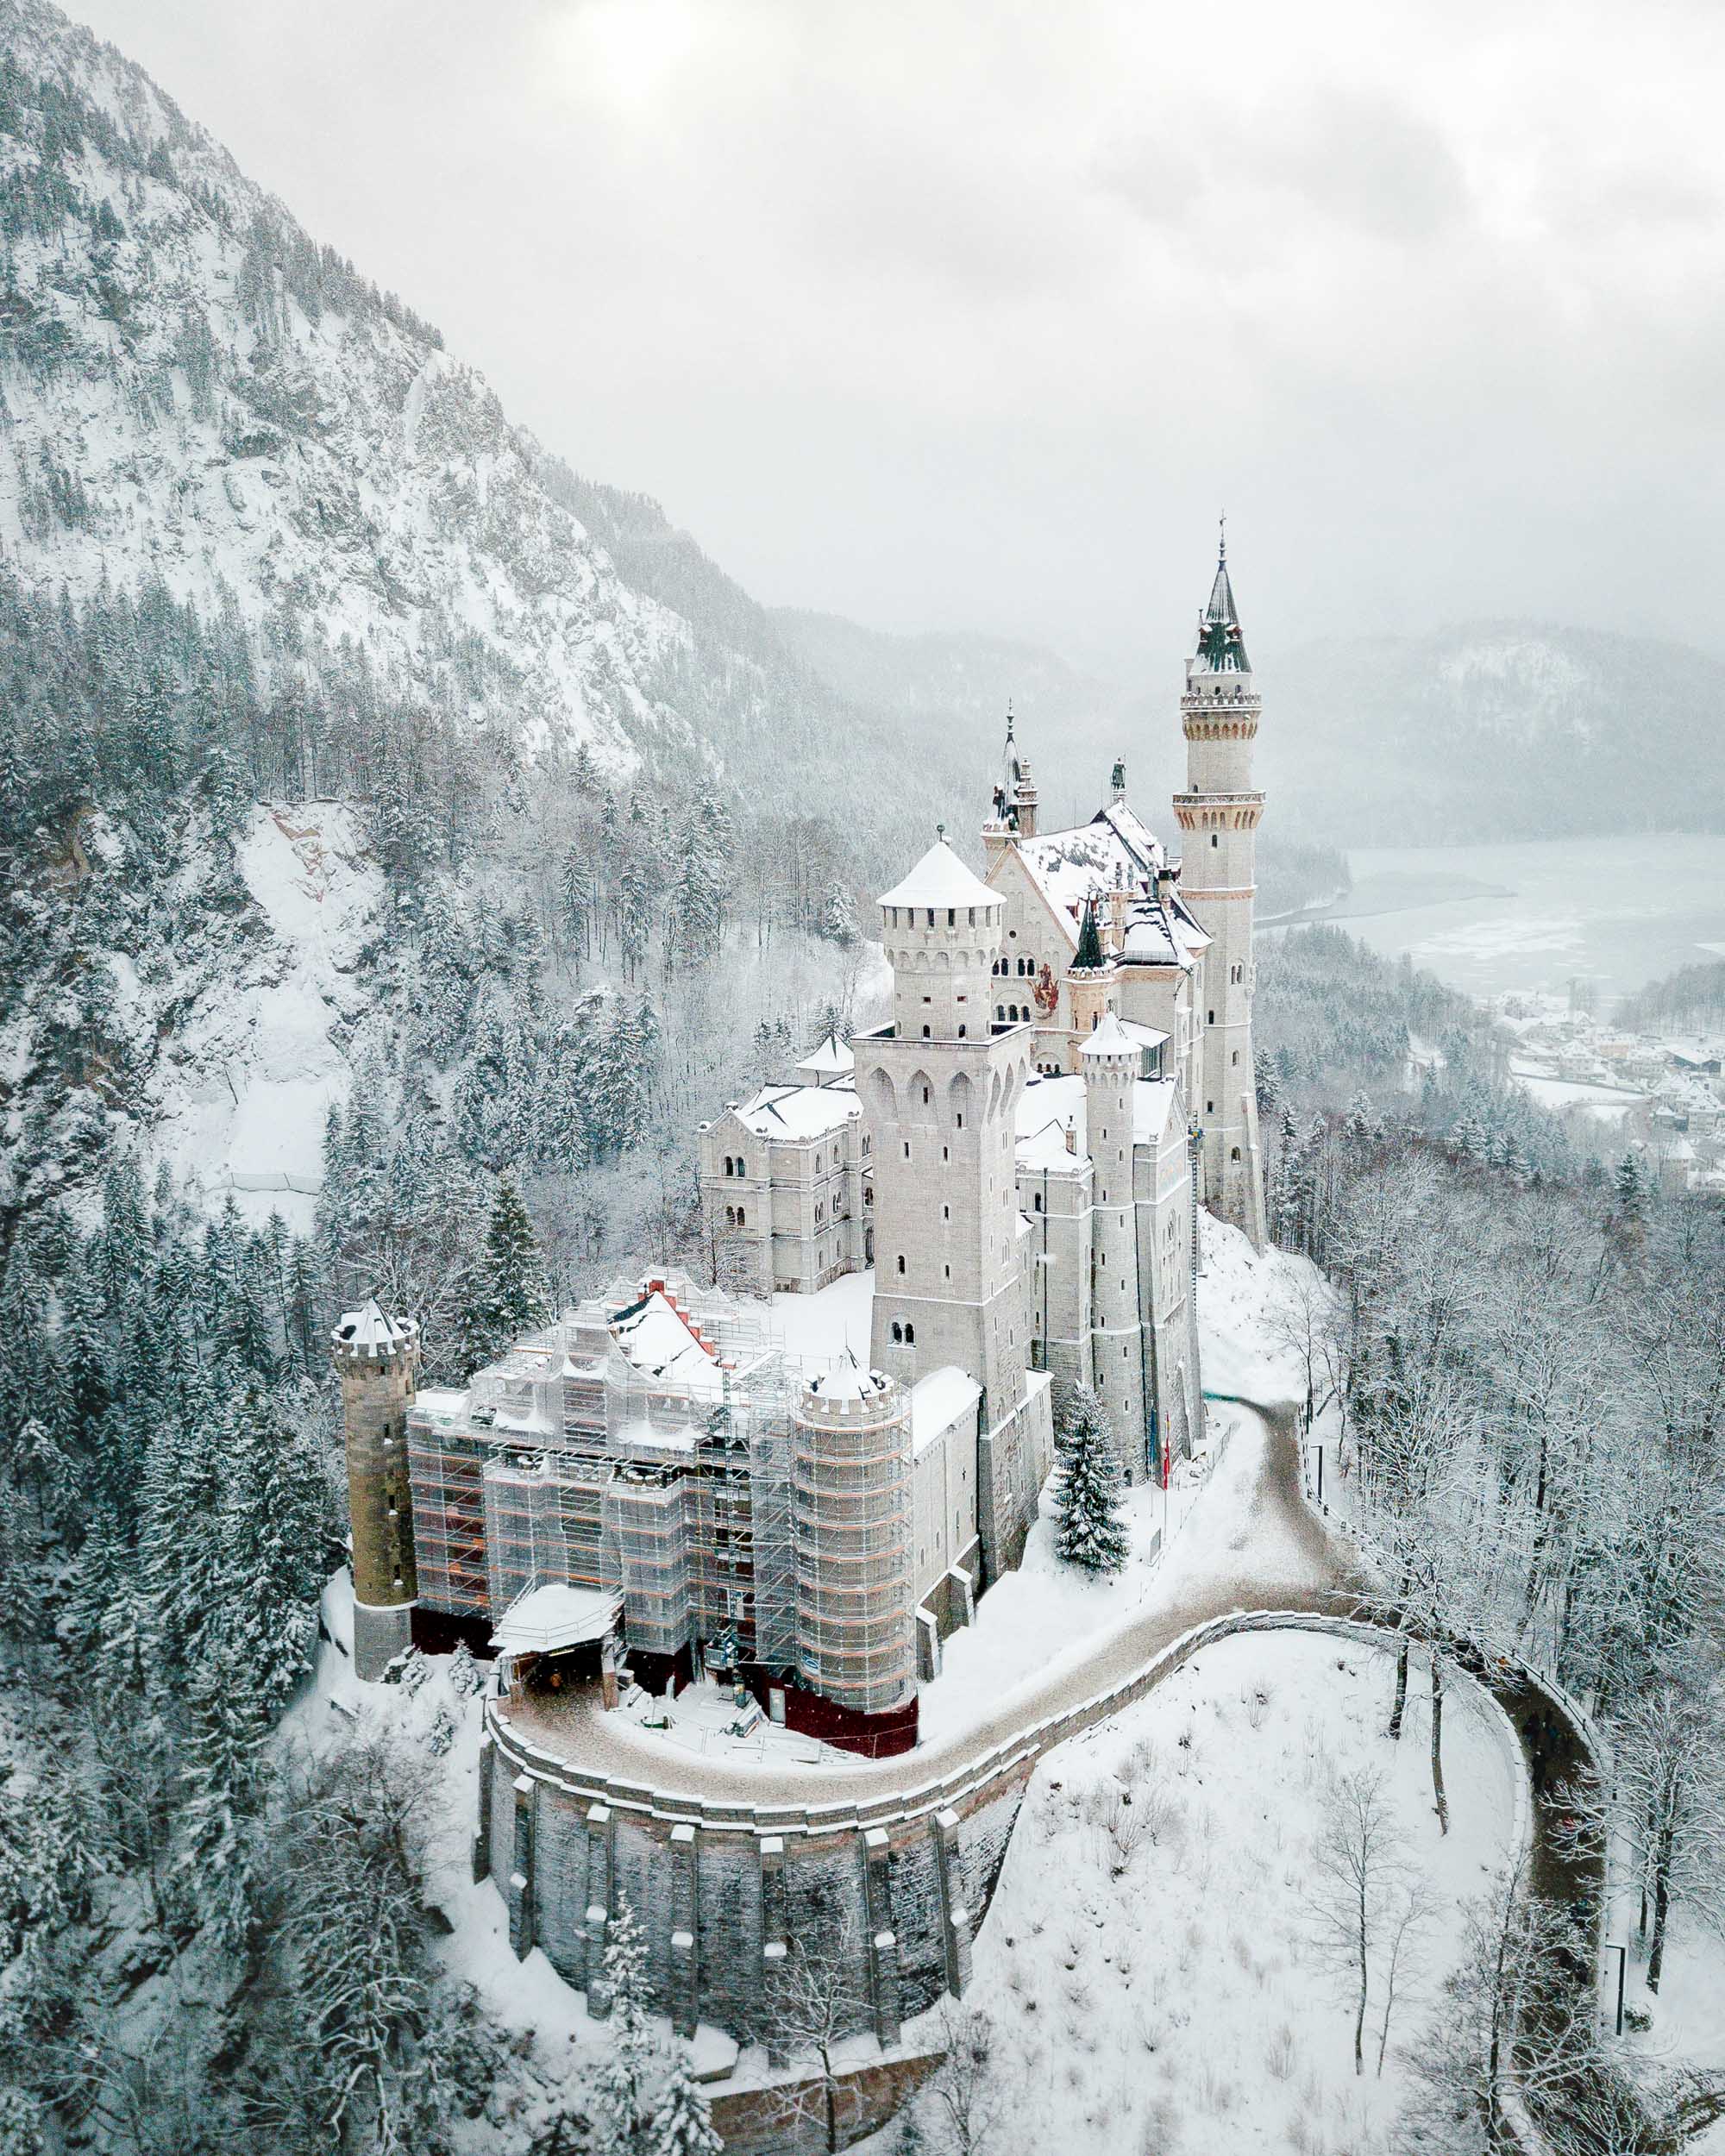 Neuschwanstein Castle: A Fairy Tale Perched in the Bavarian Alps